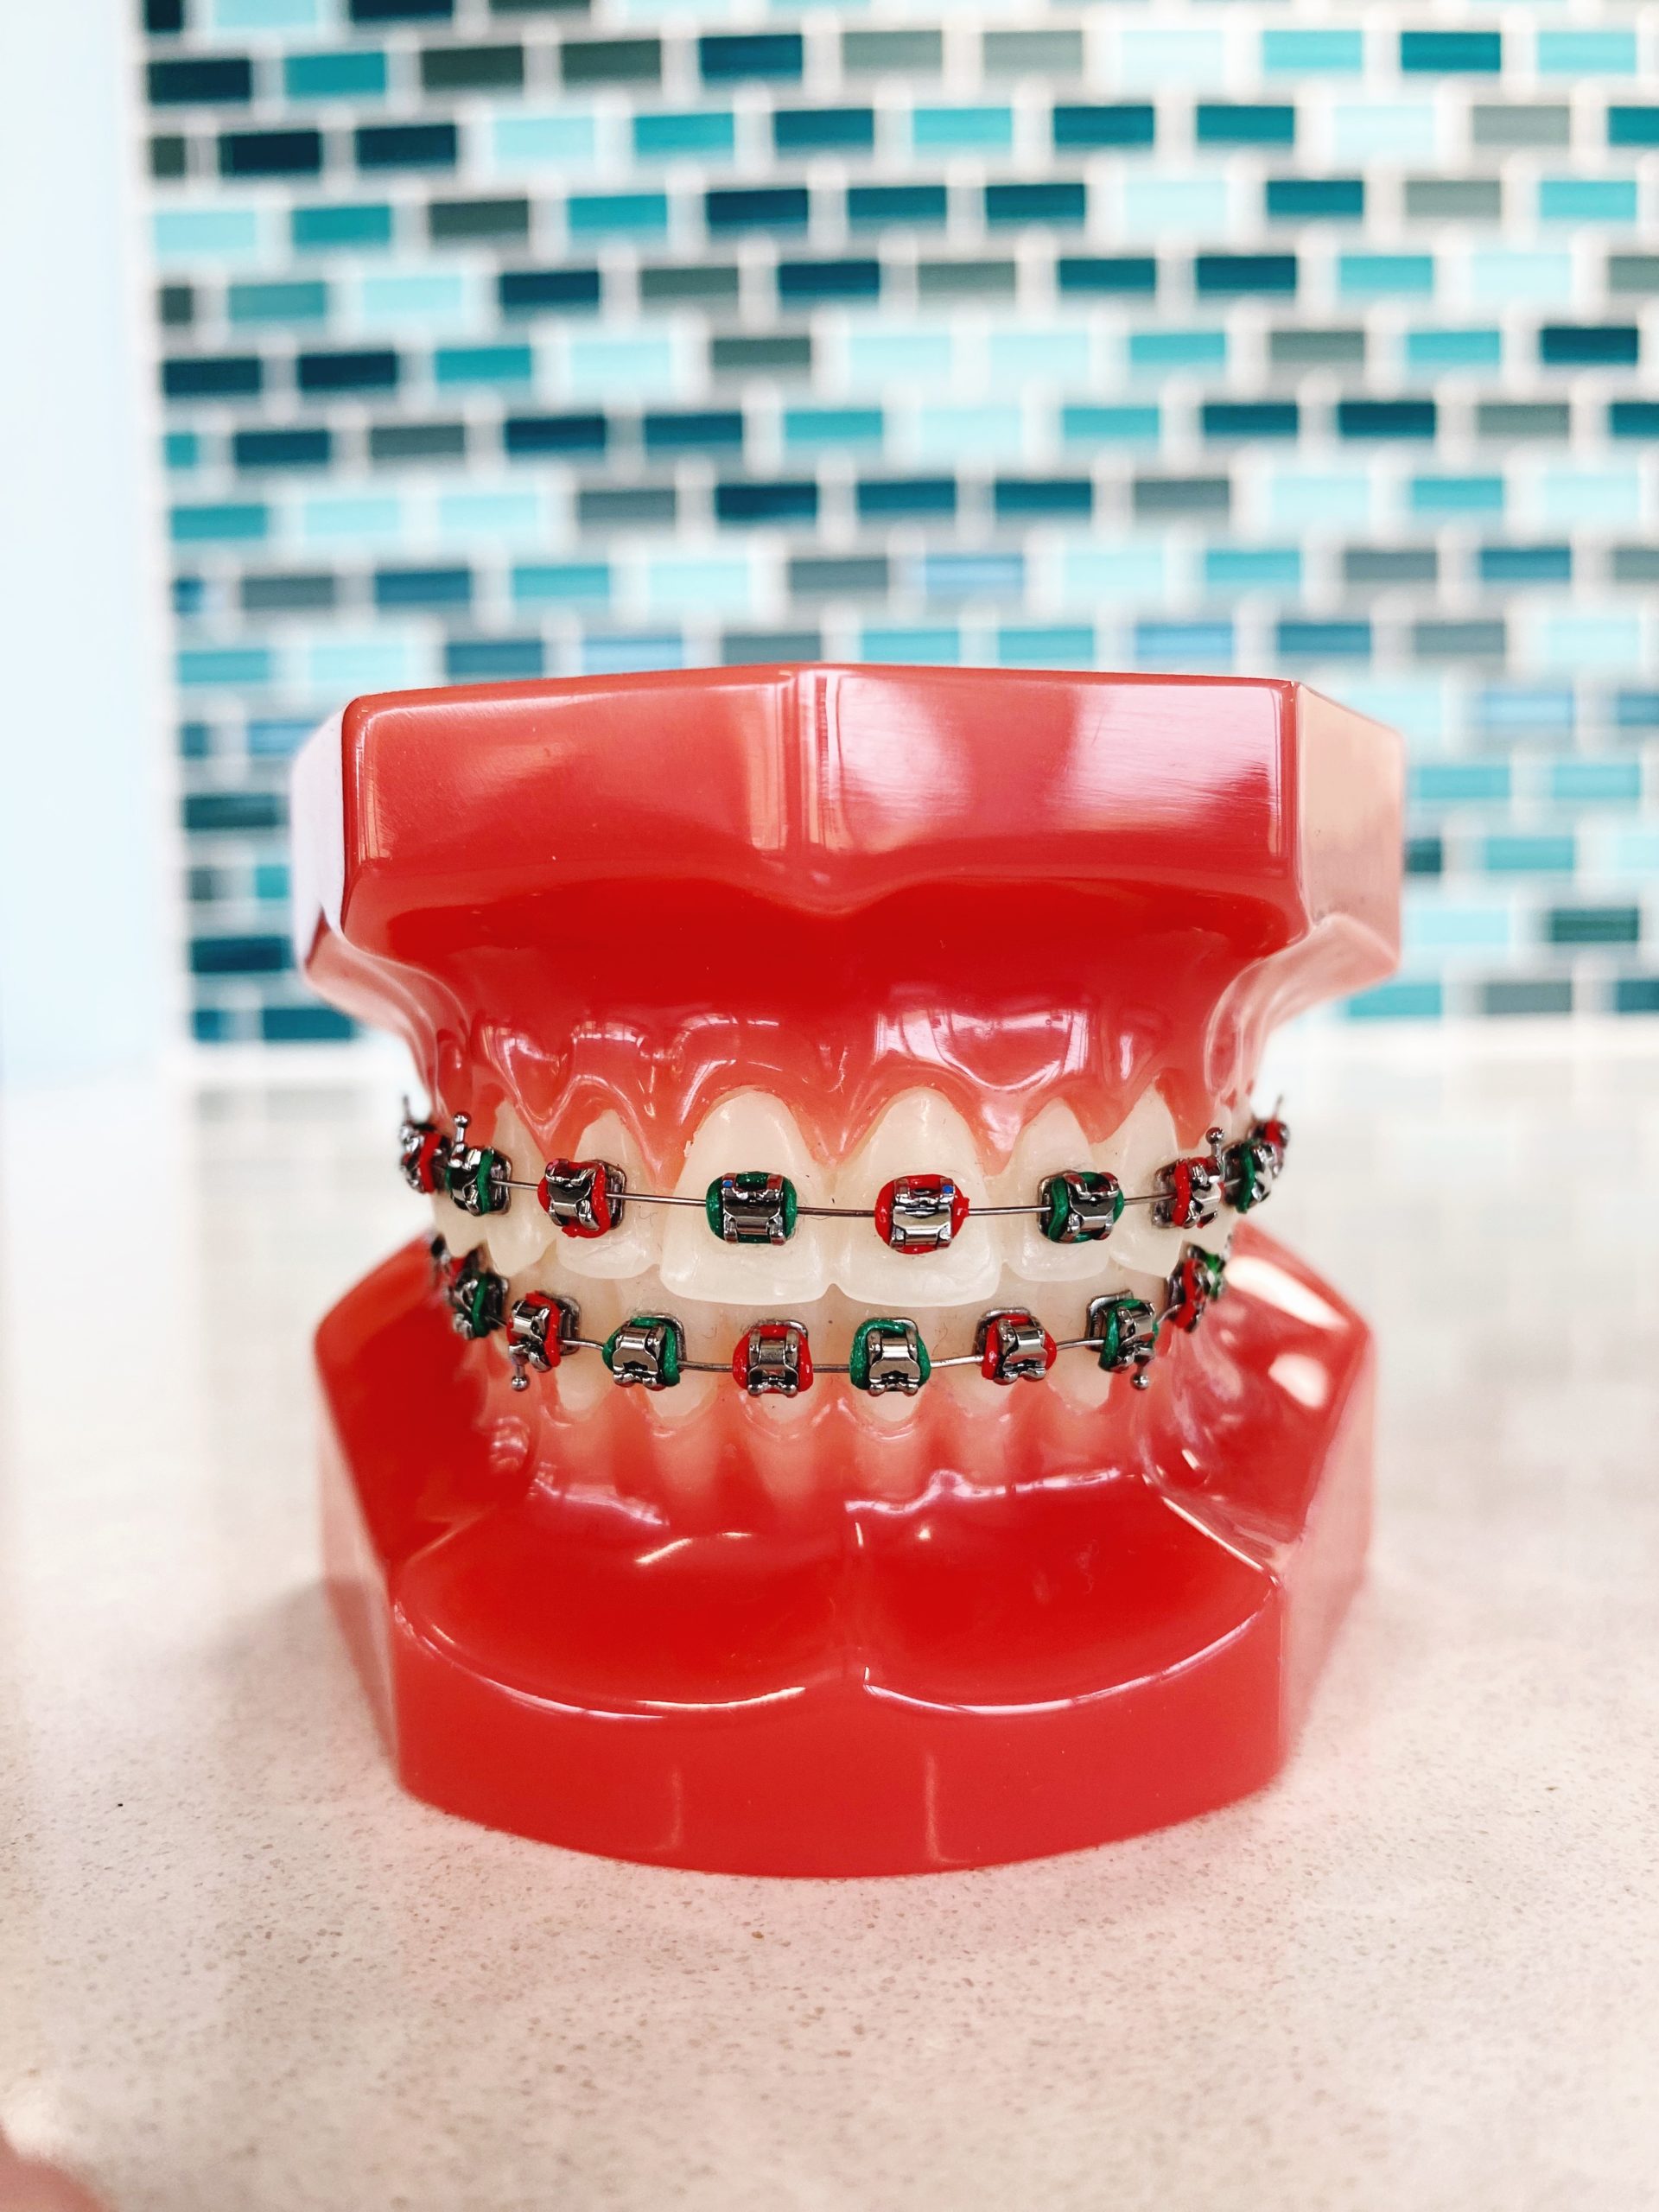 Braces Rubber Band Colors: Hunter green and cranberry